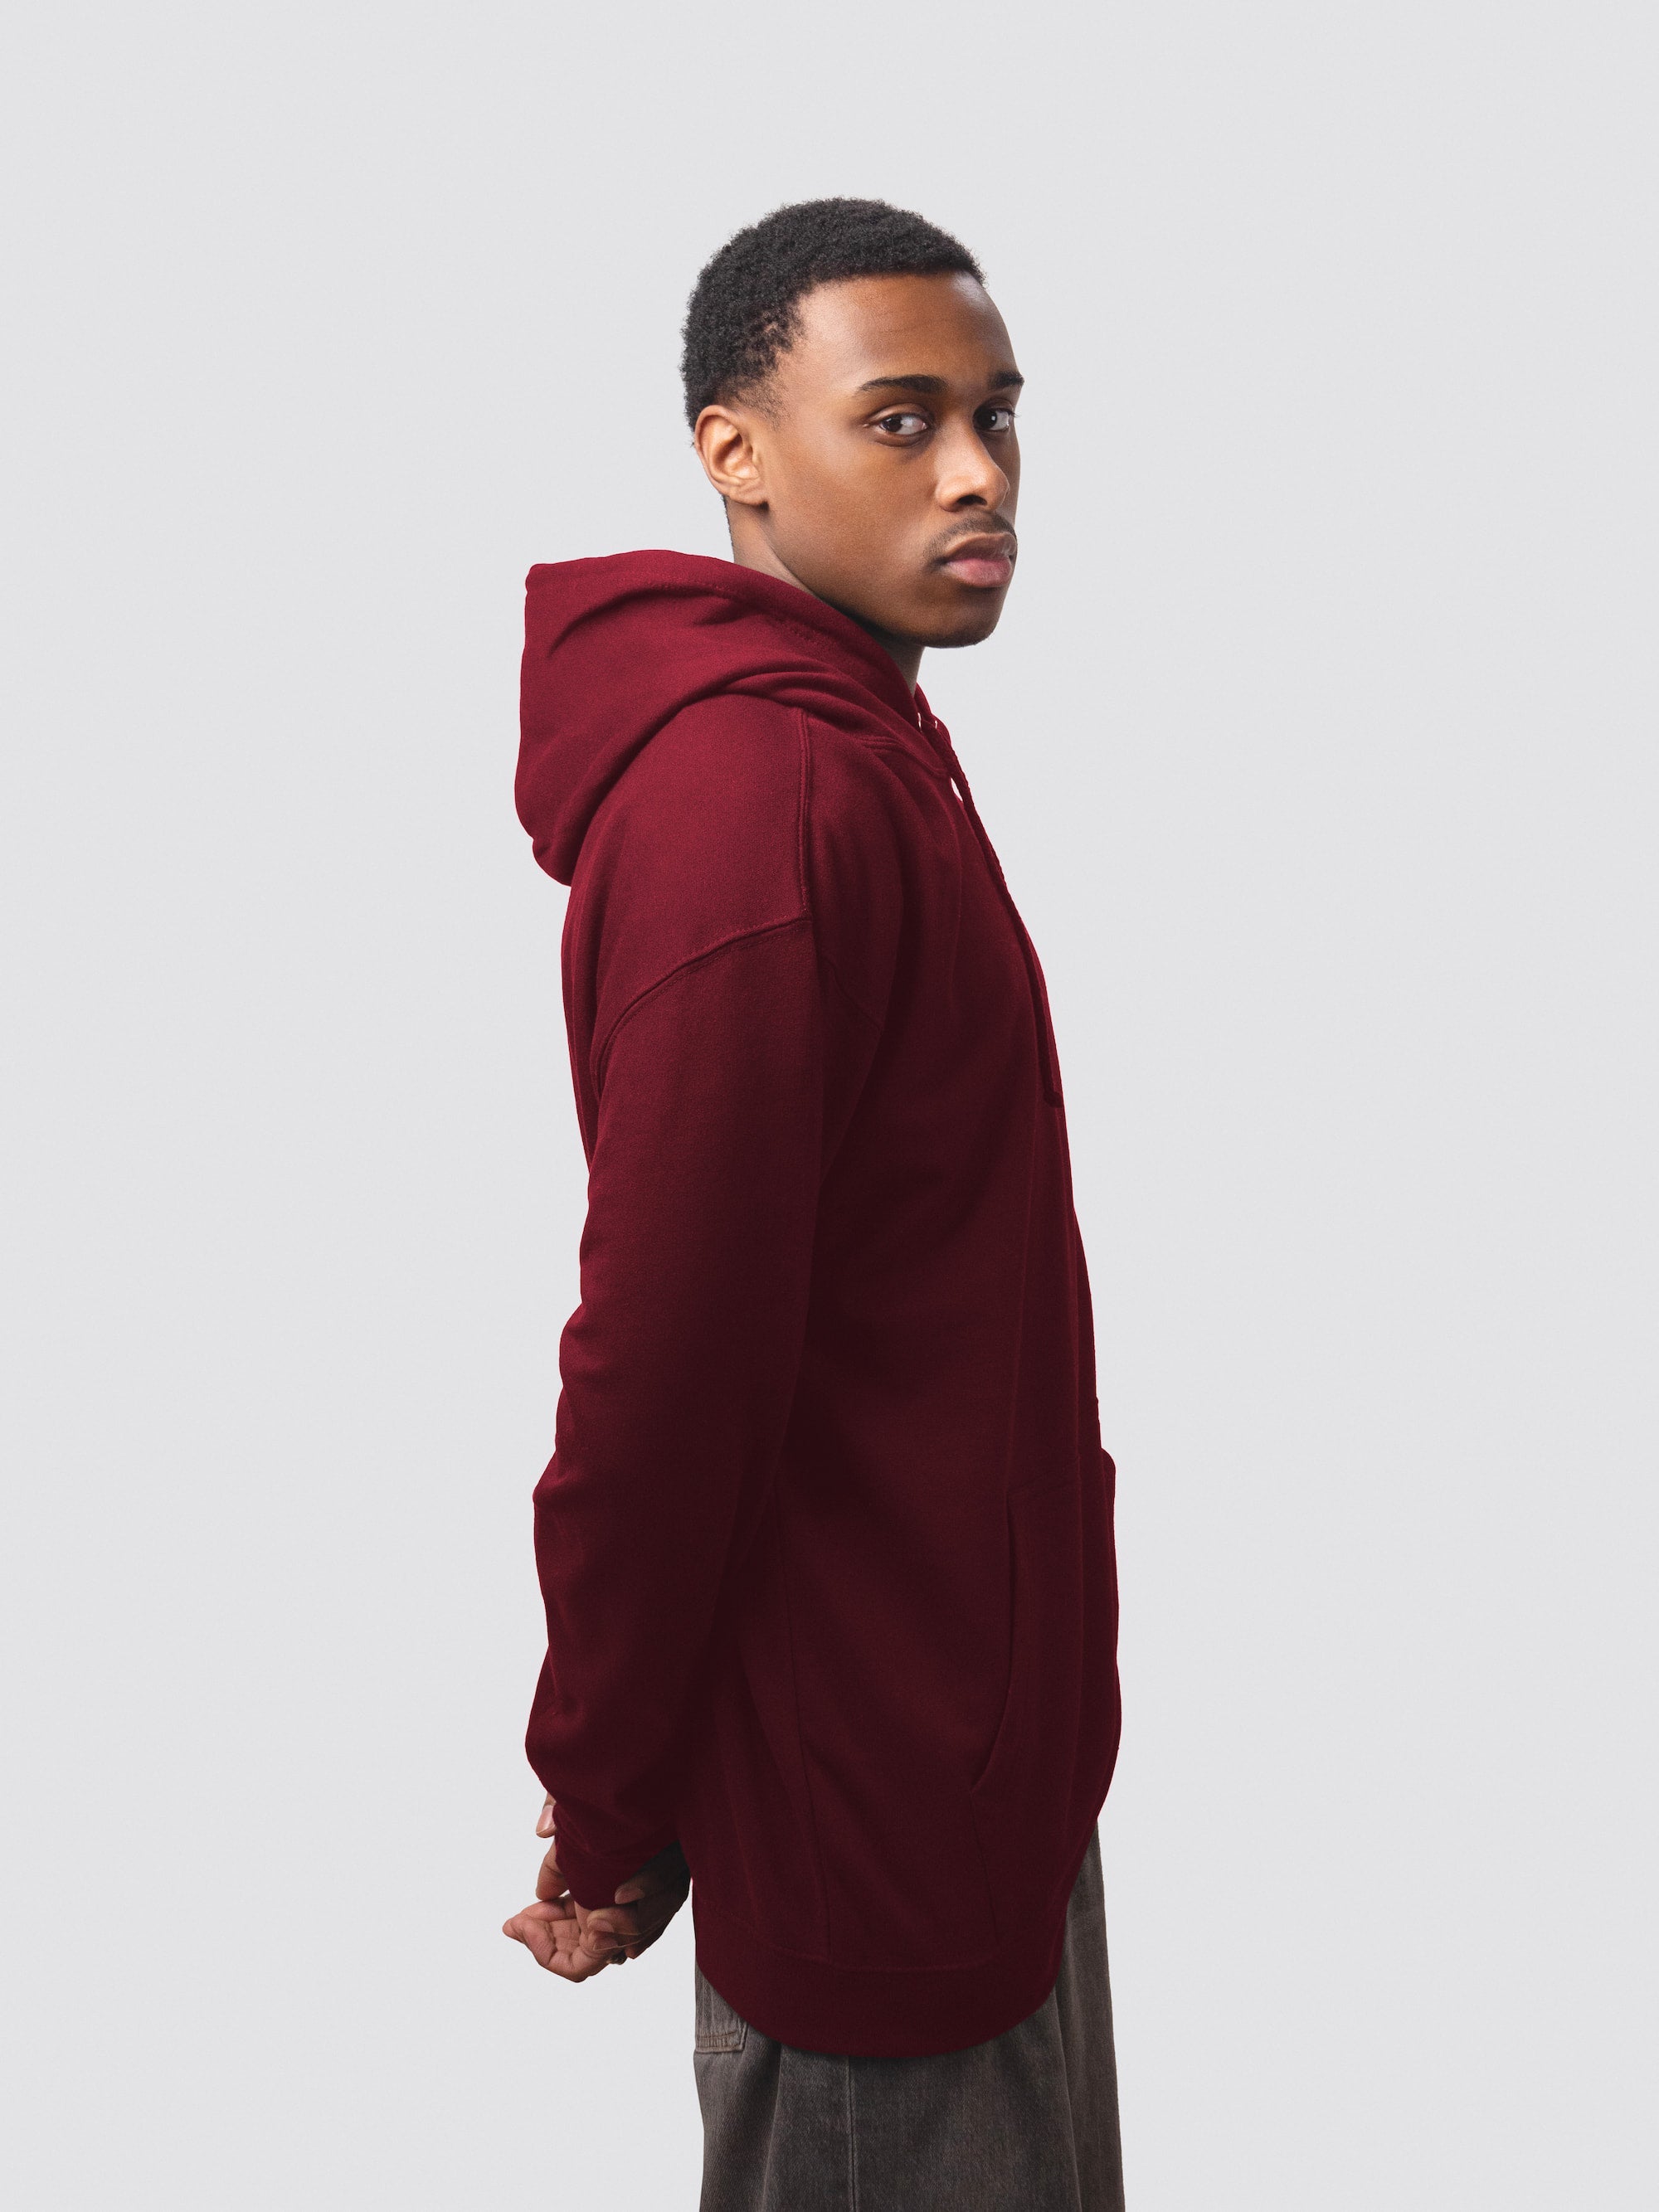 St Catherine's College hoodie, made from burgundy cotton-faced fabric